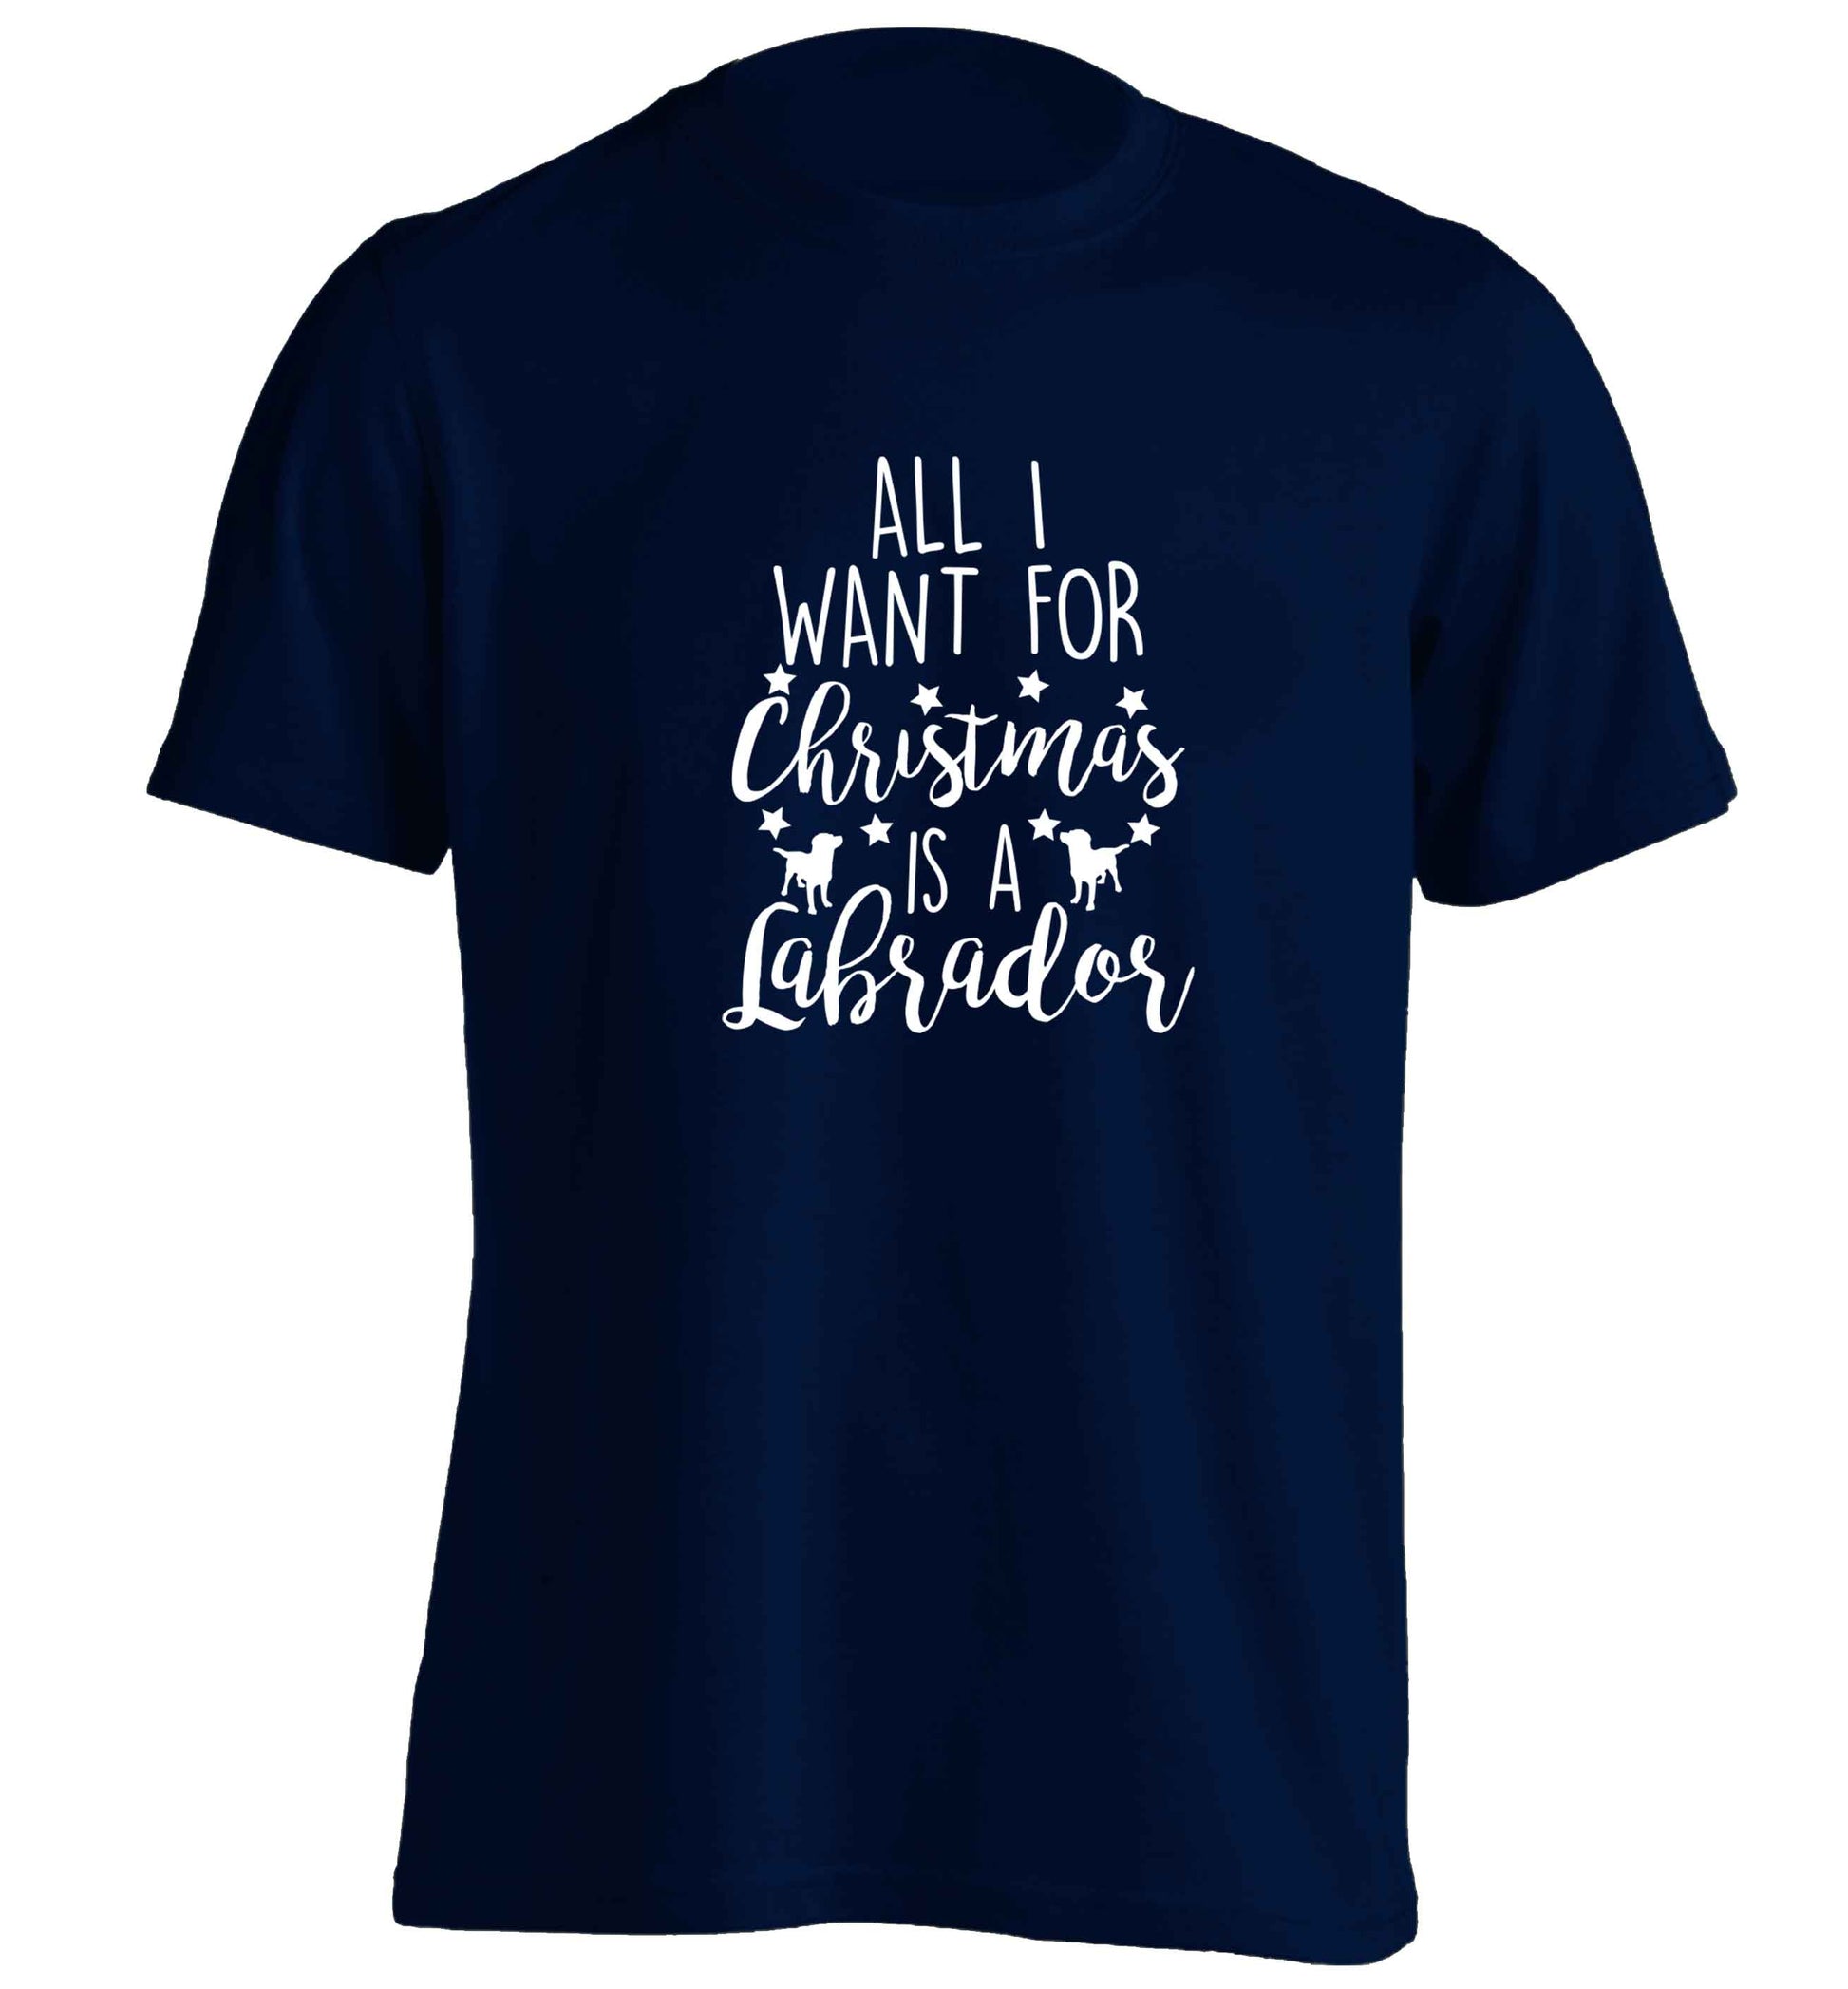 All I want for Christmas is a labrador adults unisex navy Tshirt 2XL